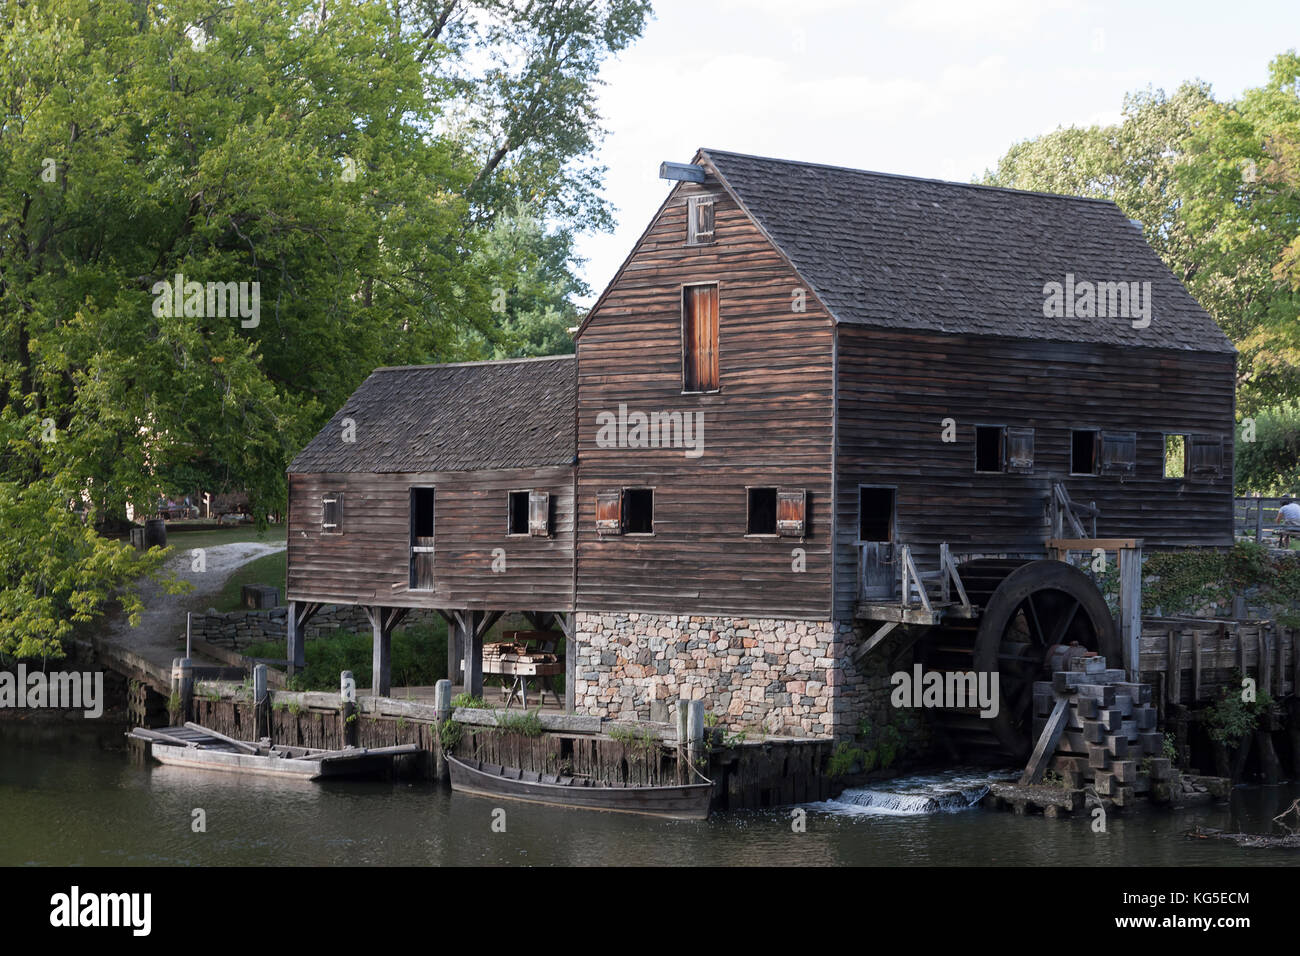 Working gristmill & water wheel at Philipsburg Manor an old Dutch American farm on Pocantico River in Sleepy Hollow, Westchester County, NY. Stock Photo